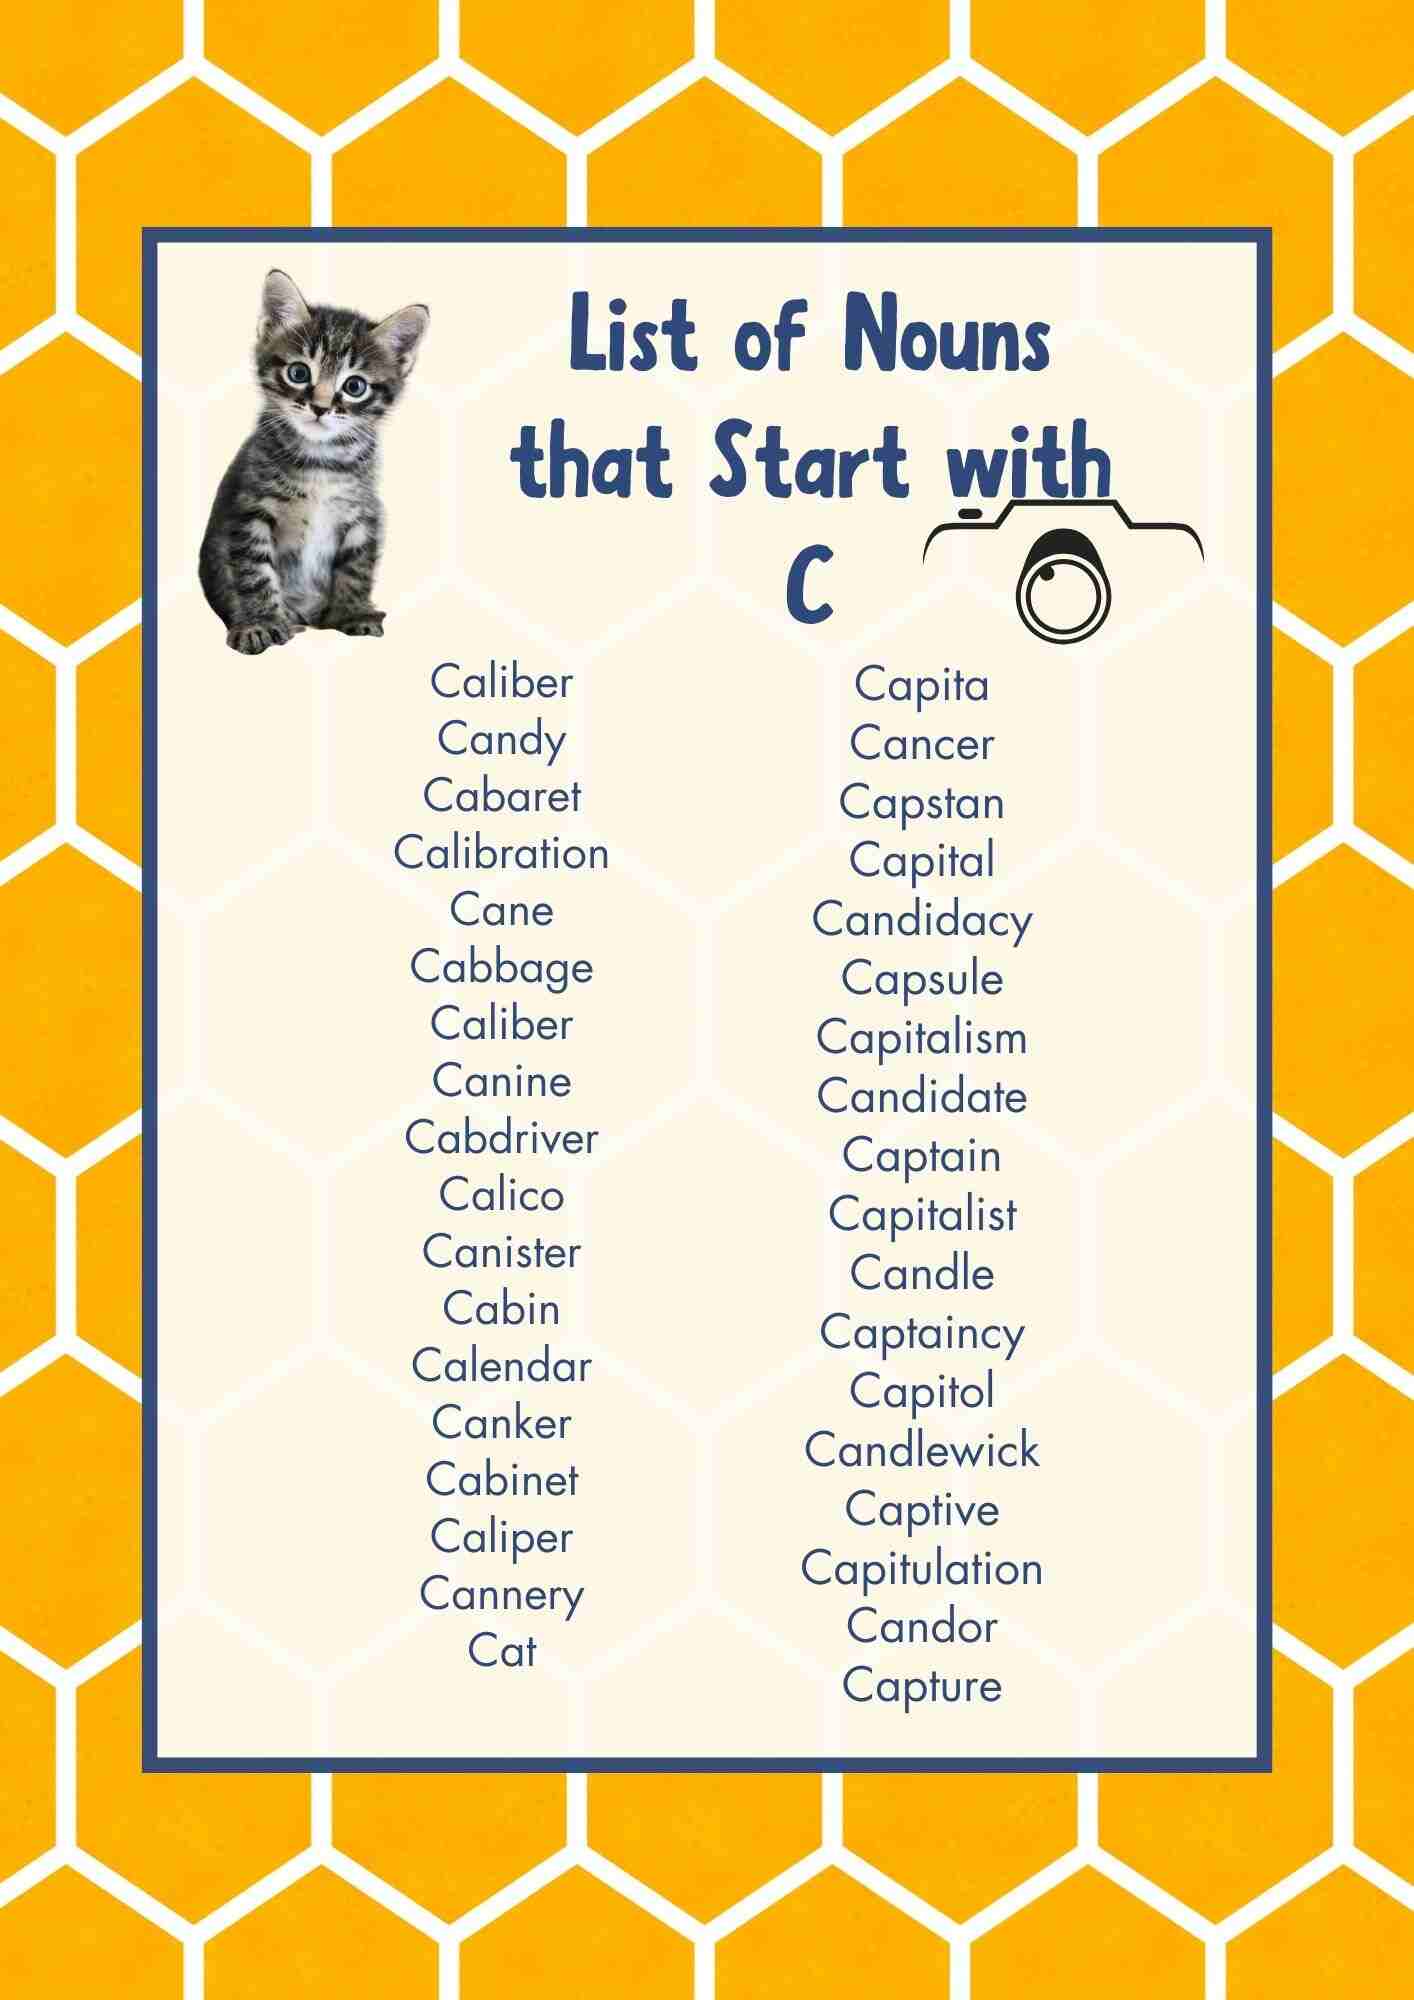 Nouns that Start with C